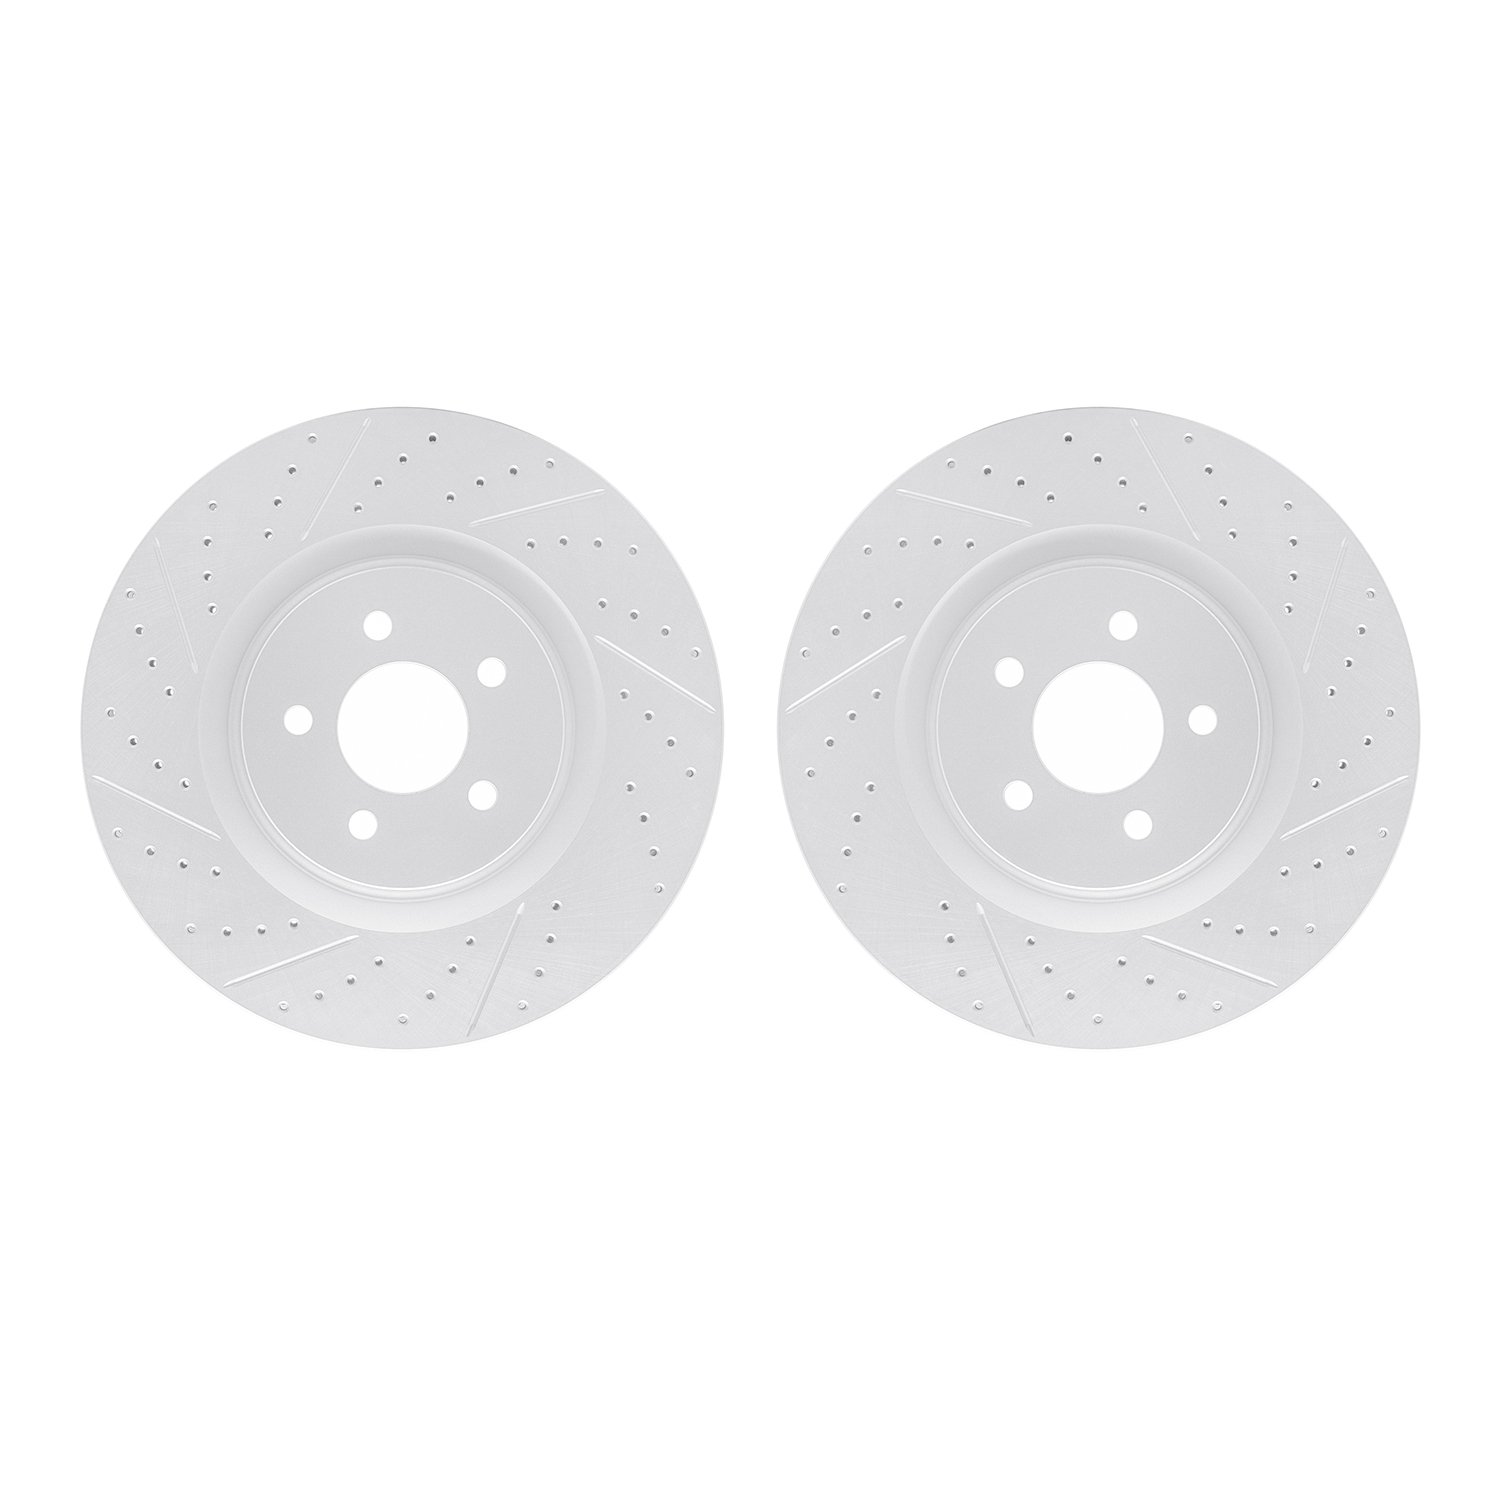 2002-54096 Geoperformance Drilled/Slotted Brake Rotors, 2007-2014 Ford/Lincoln/Mercury/Mazda, Position: Front